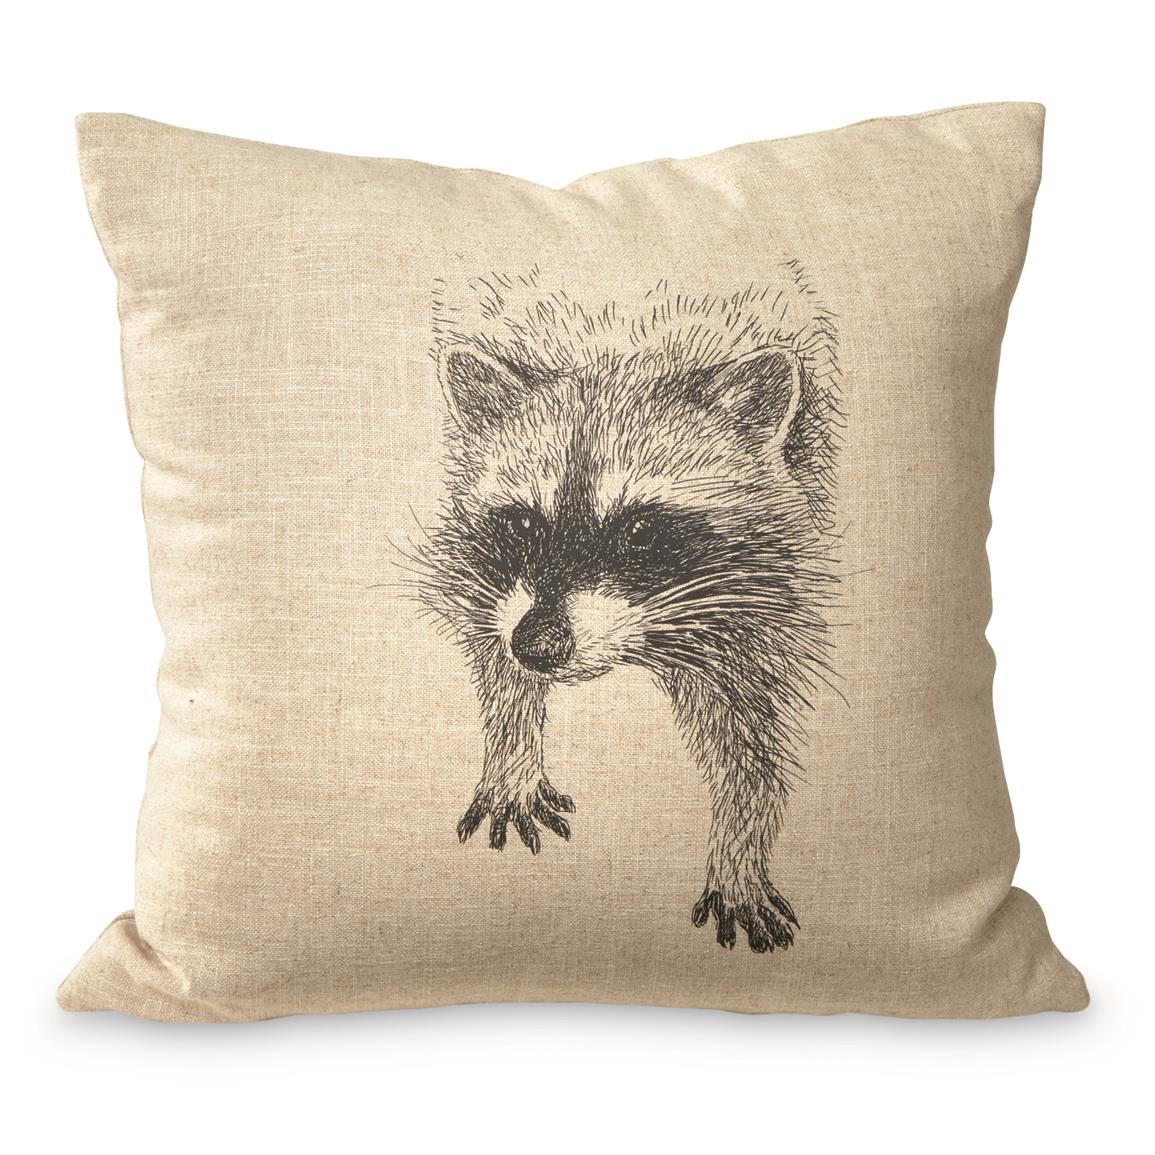 Wooded River Racoon Decorative Pillow, Linen Natural